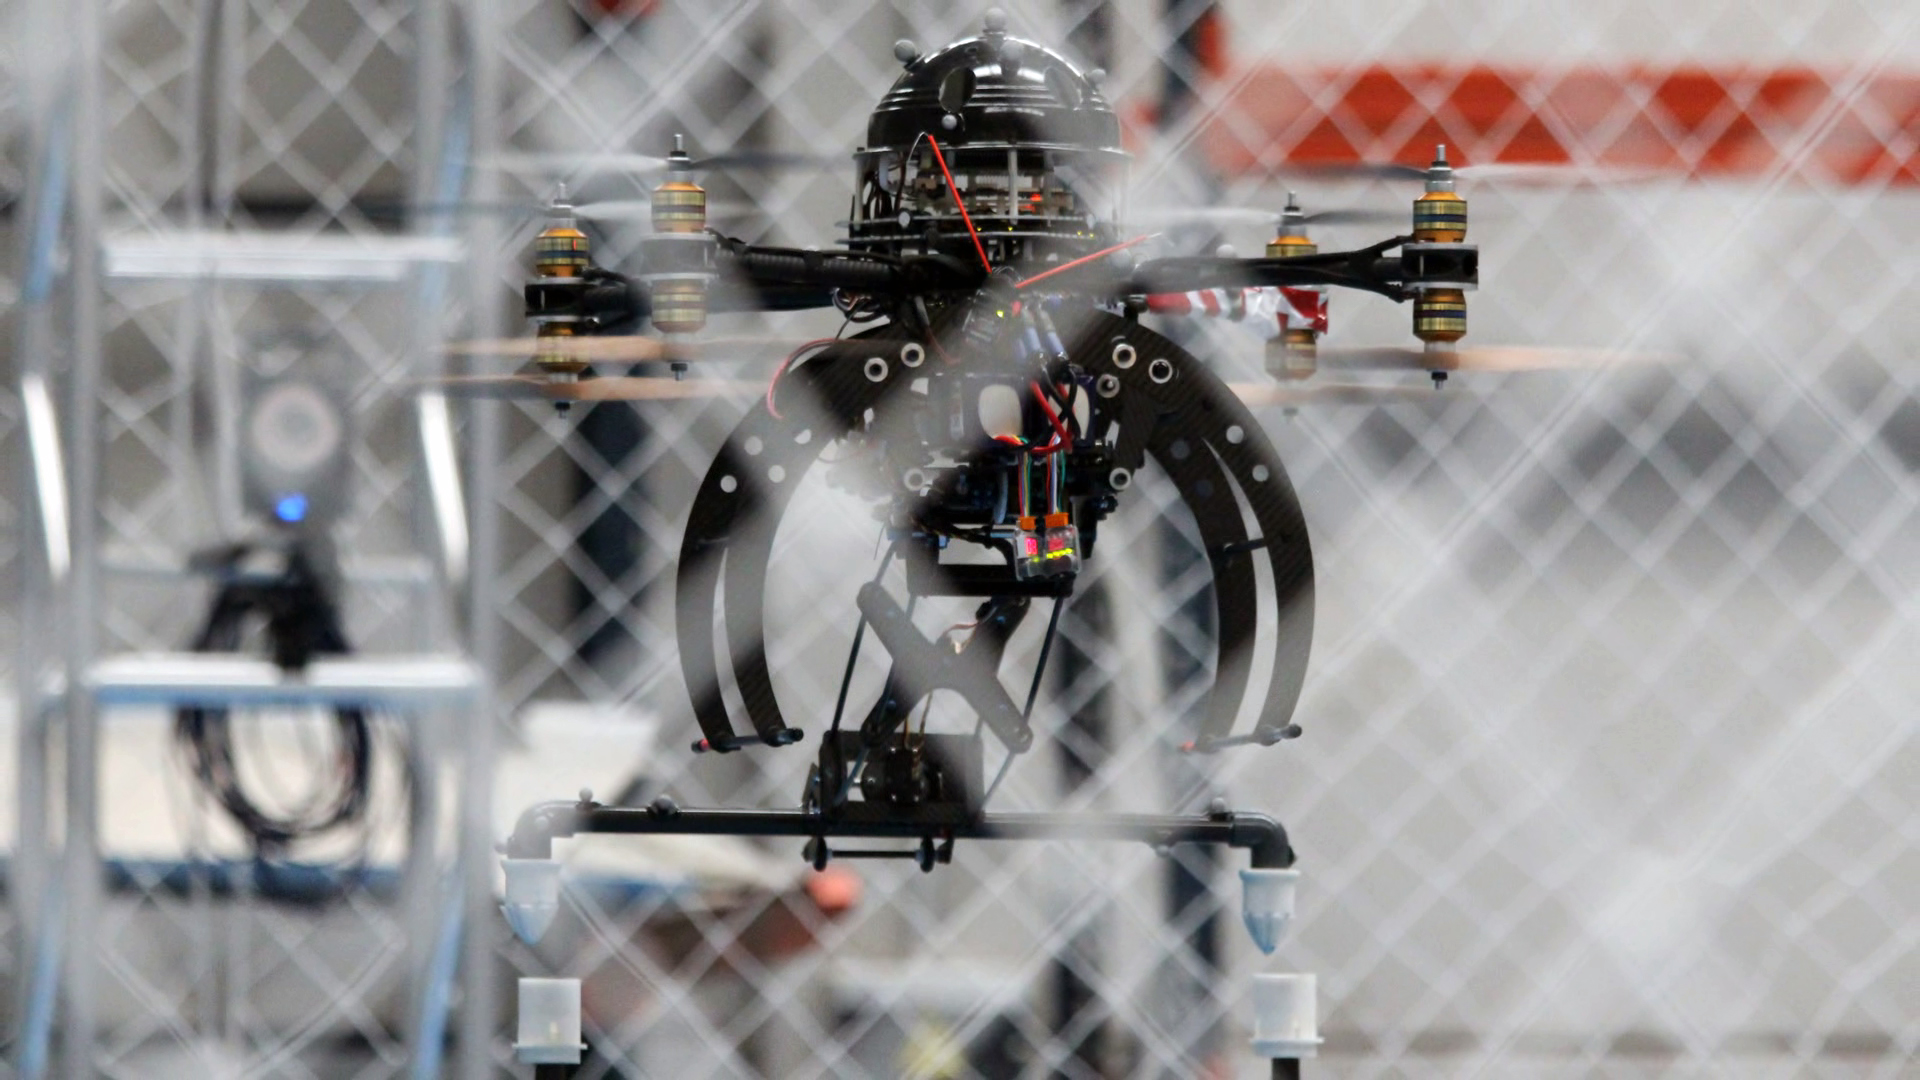 ARCAS: FLYING ROBOTS WILL GO WHERE HUMANS CAN’T